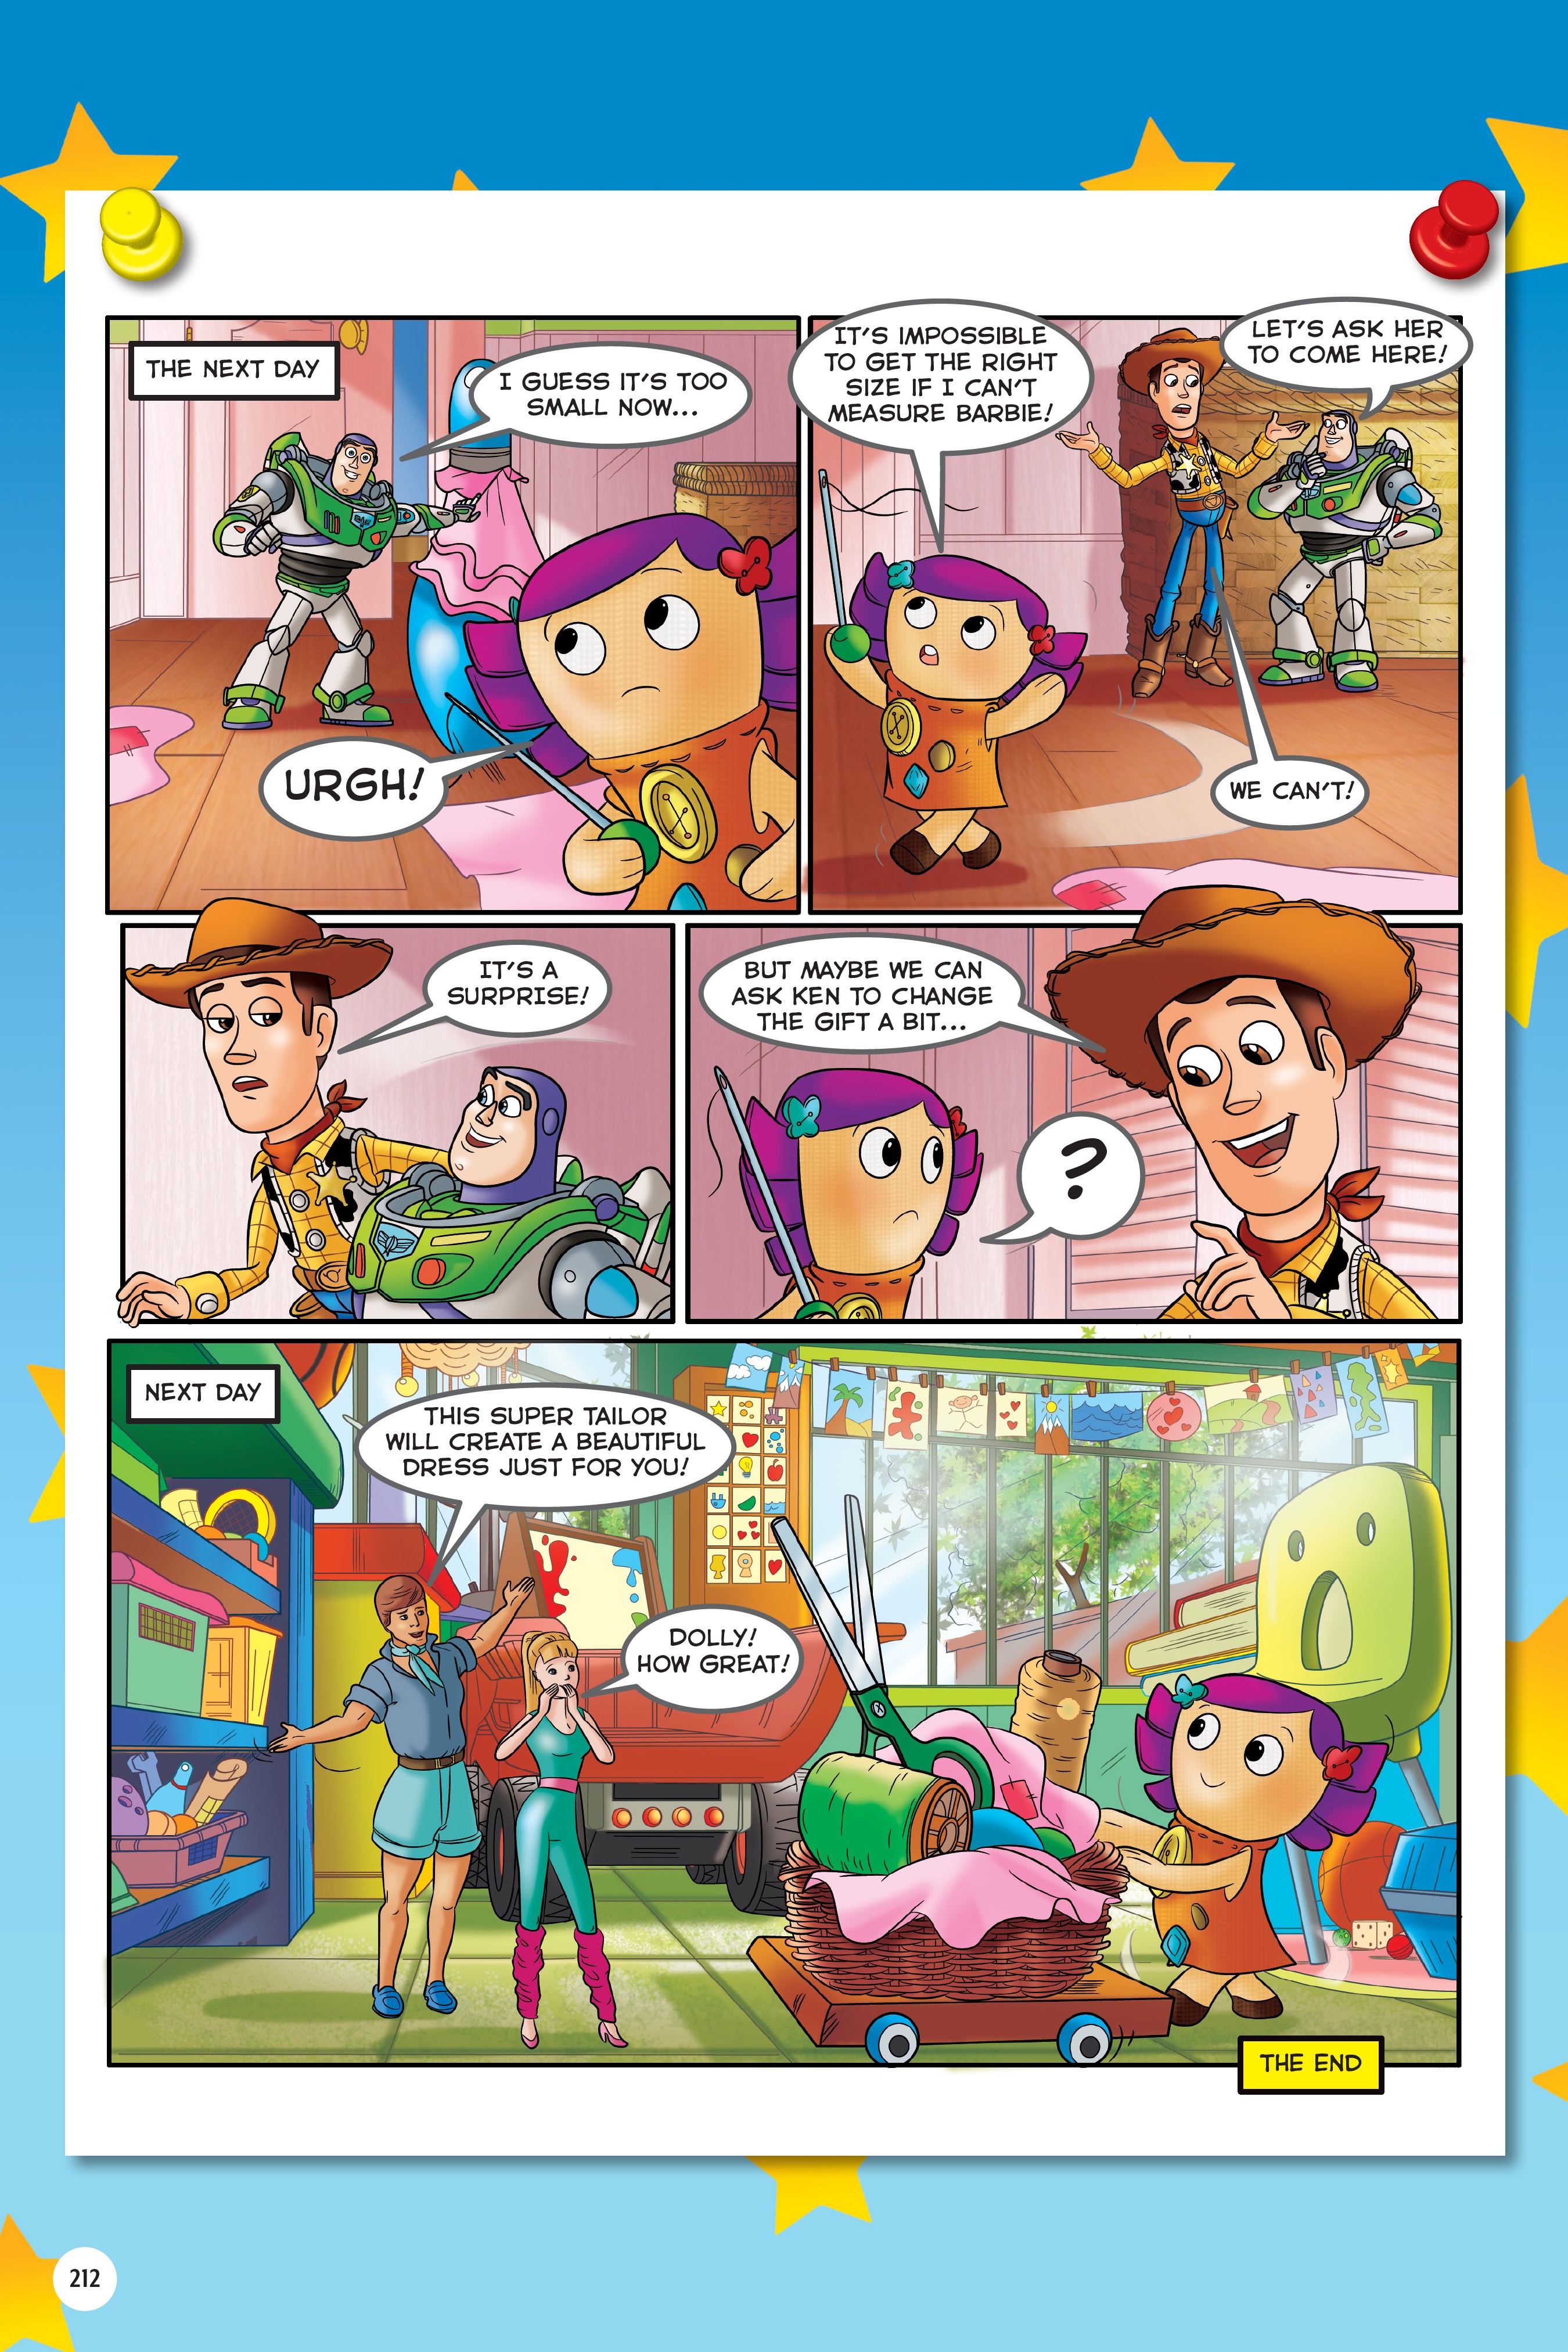 Disney Pixar Toy Story Adventures Tpb 1 Part 3 | Read Disney Pixar Toy Story  Adventures Tpb 1 Part 3 comic online in high quality. Read Full Comic  online for free -